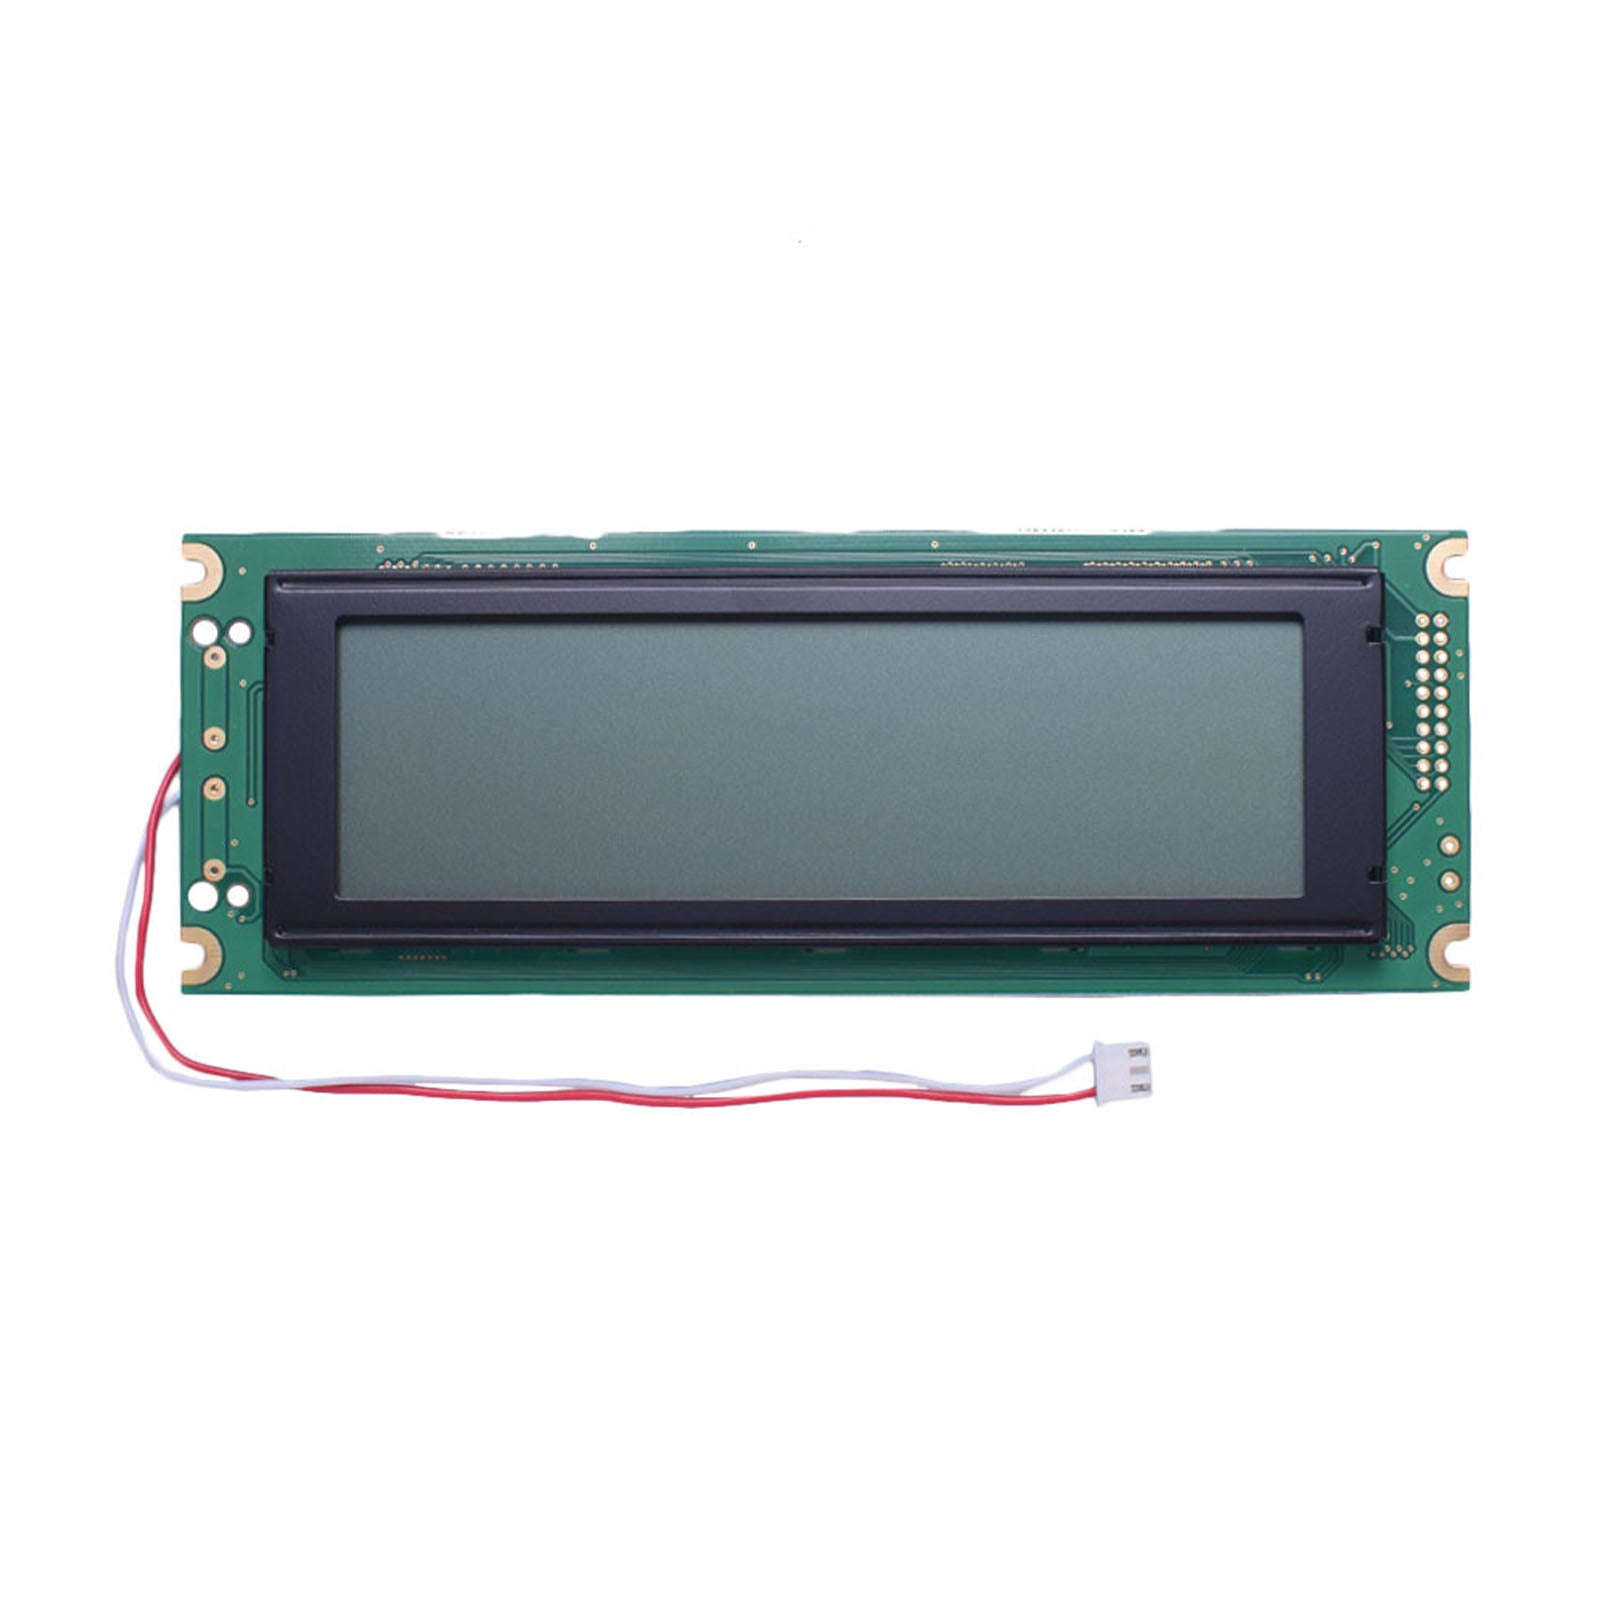 5.46-inch 240x64 LCD Graphic display module with MCU interface